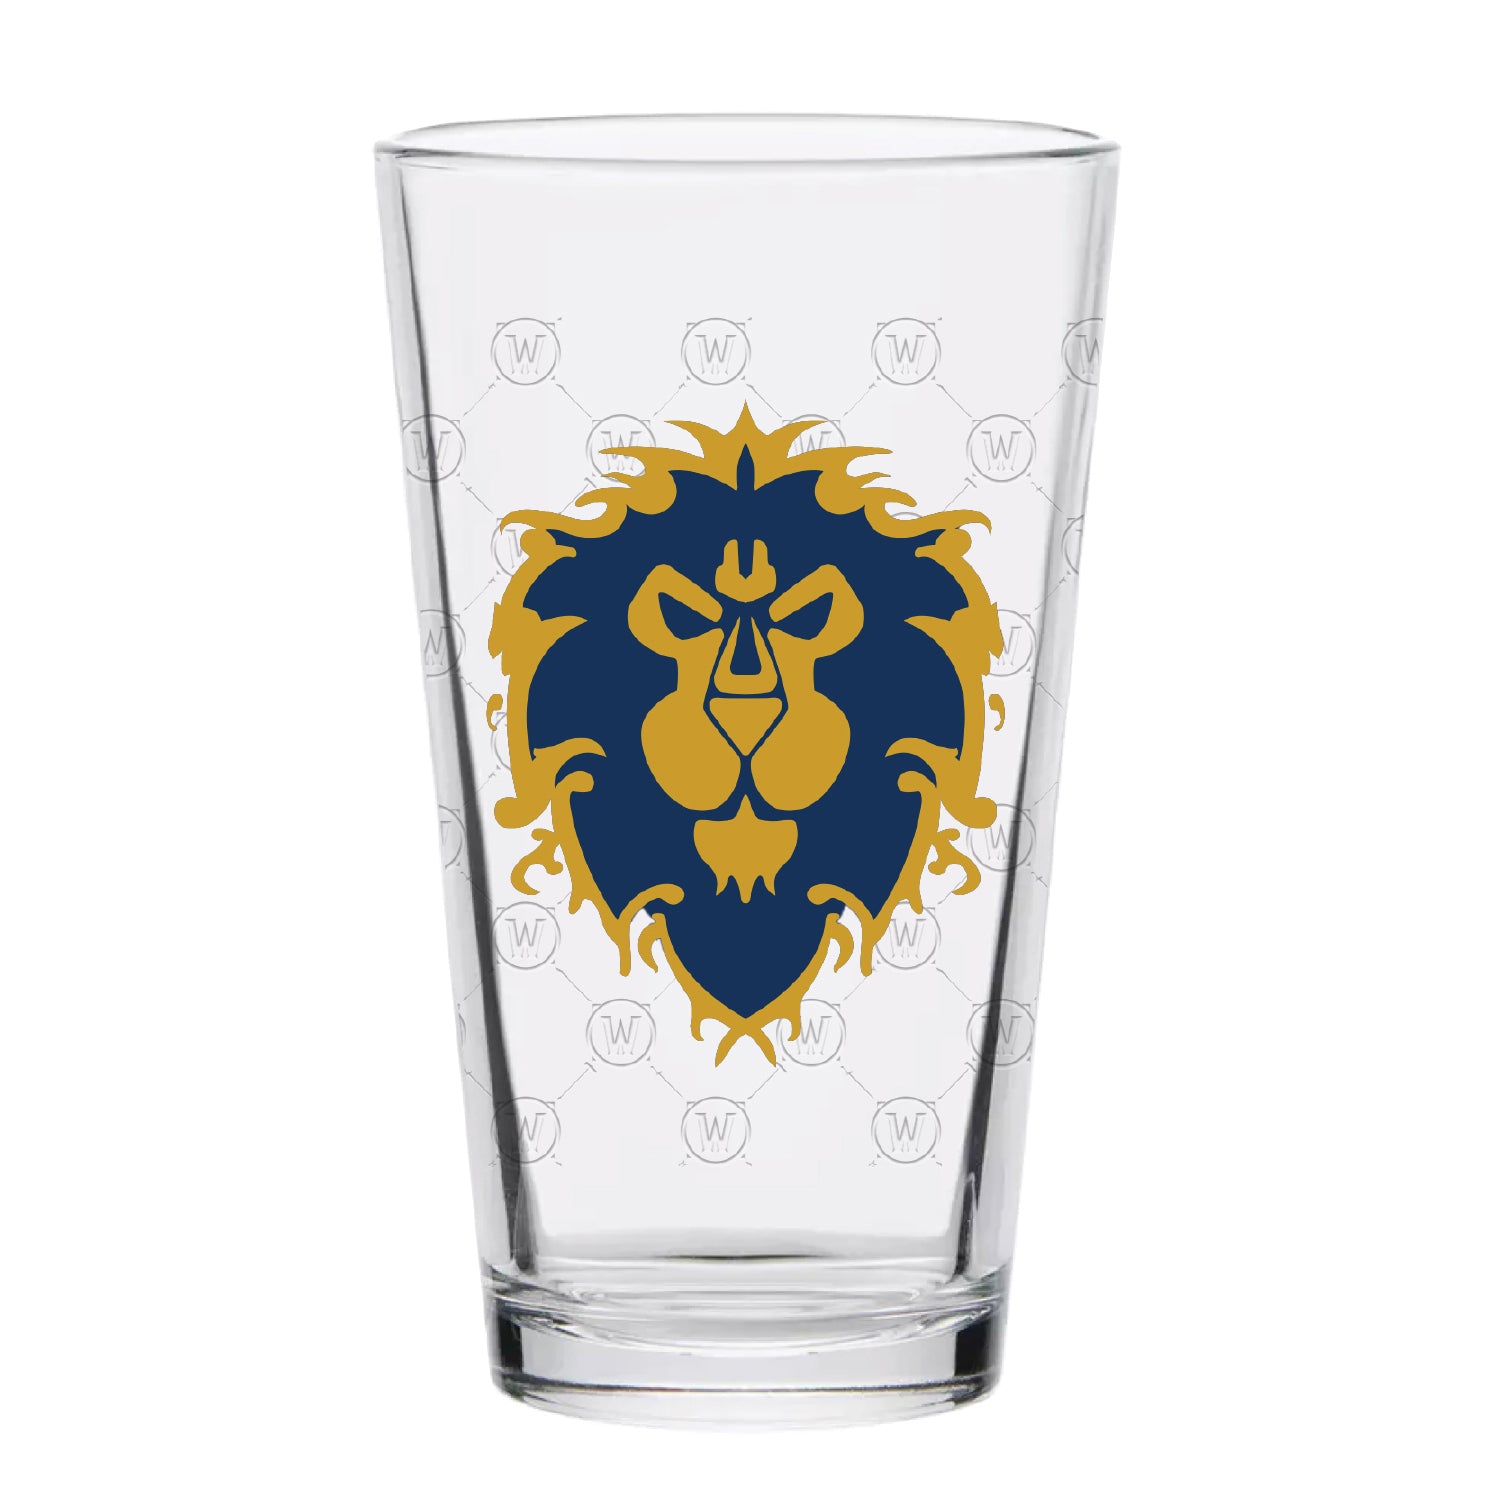 World of Warcraft Alliance 454ml Pint Glass in Blue - Front View